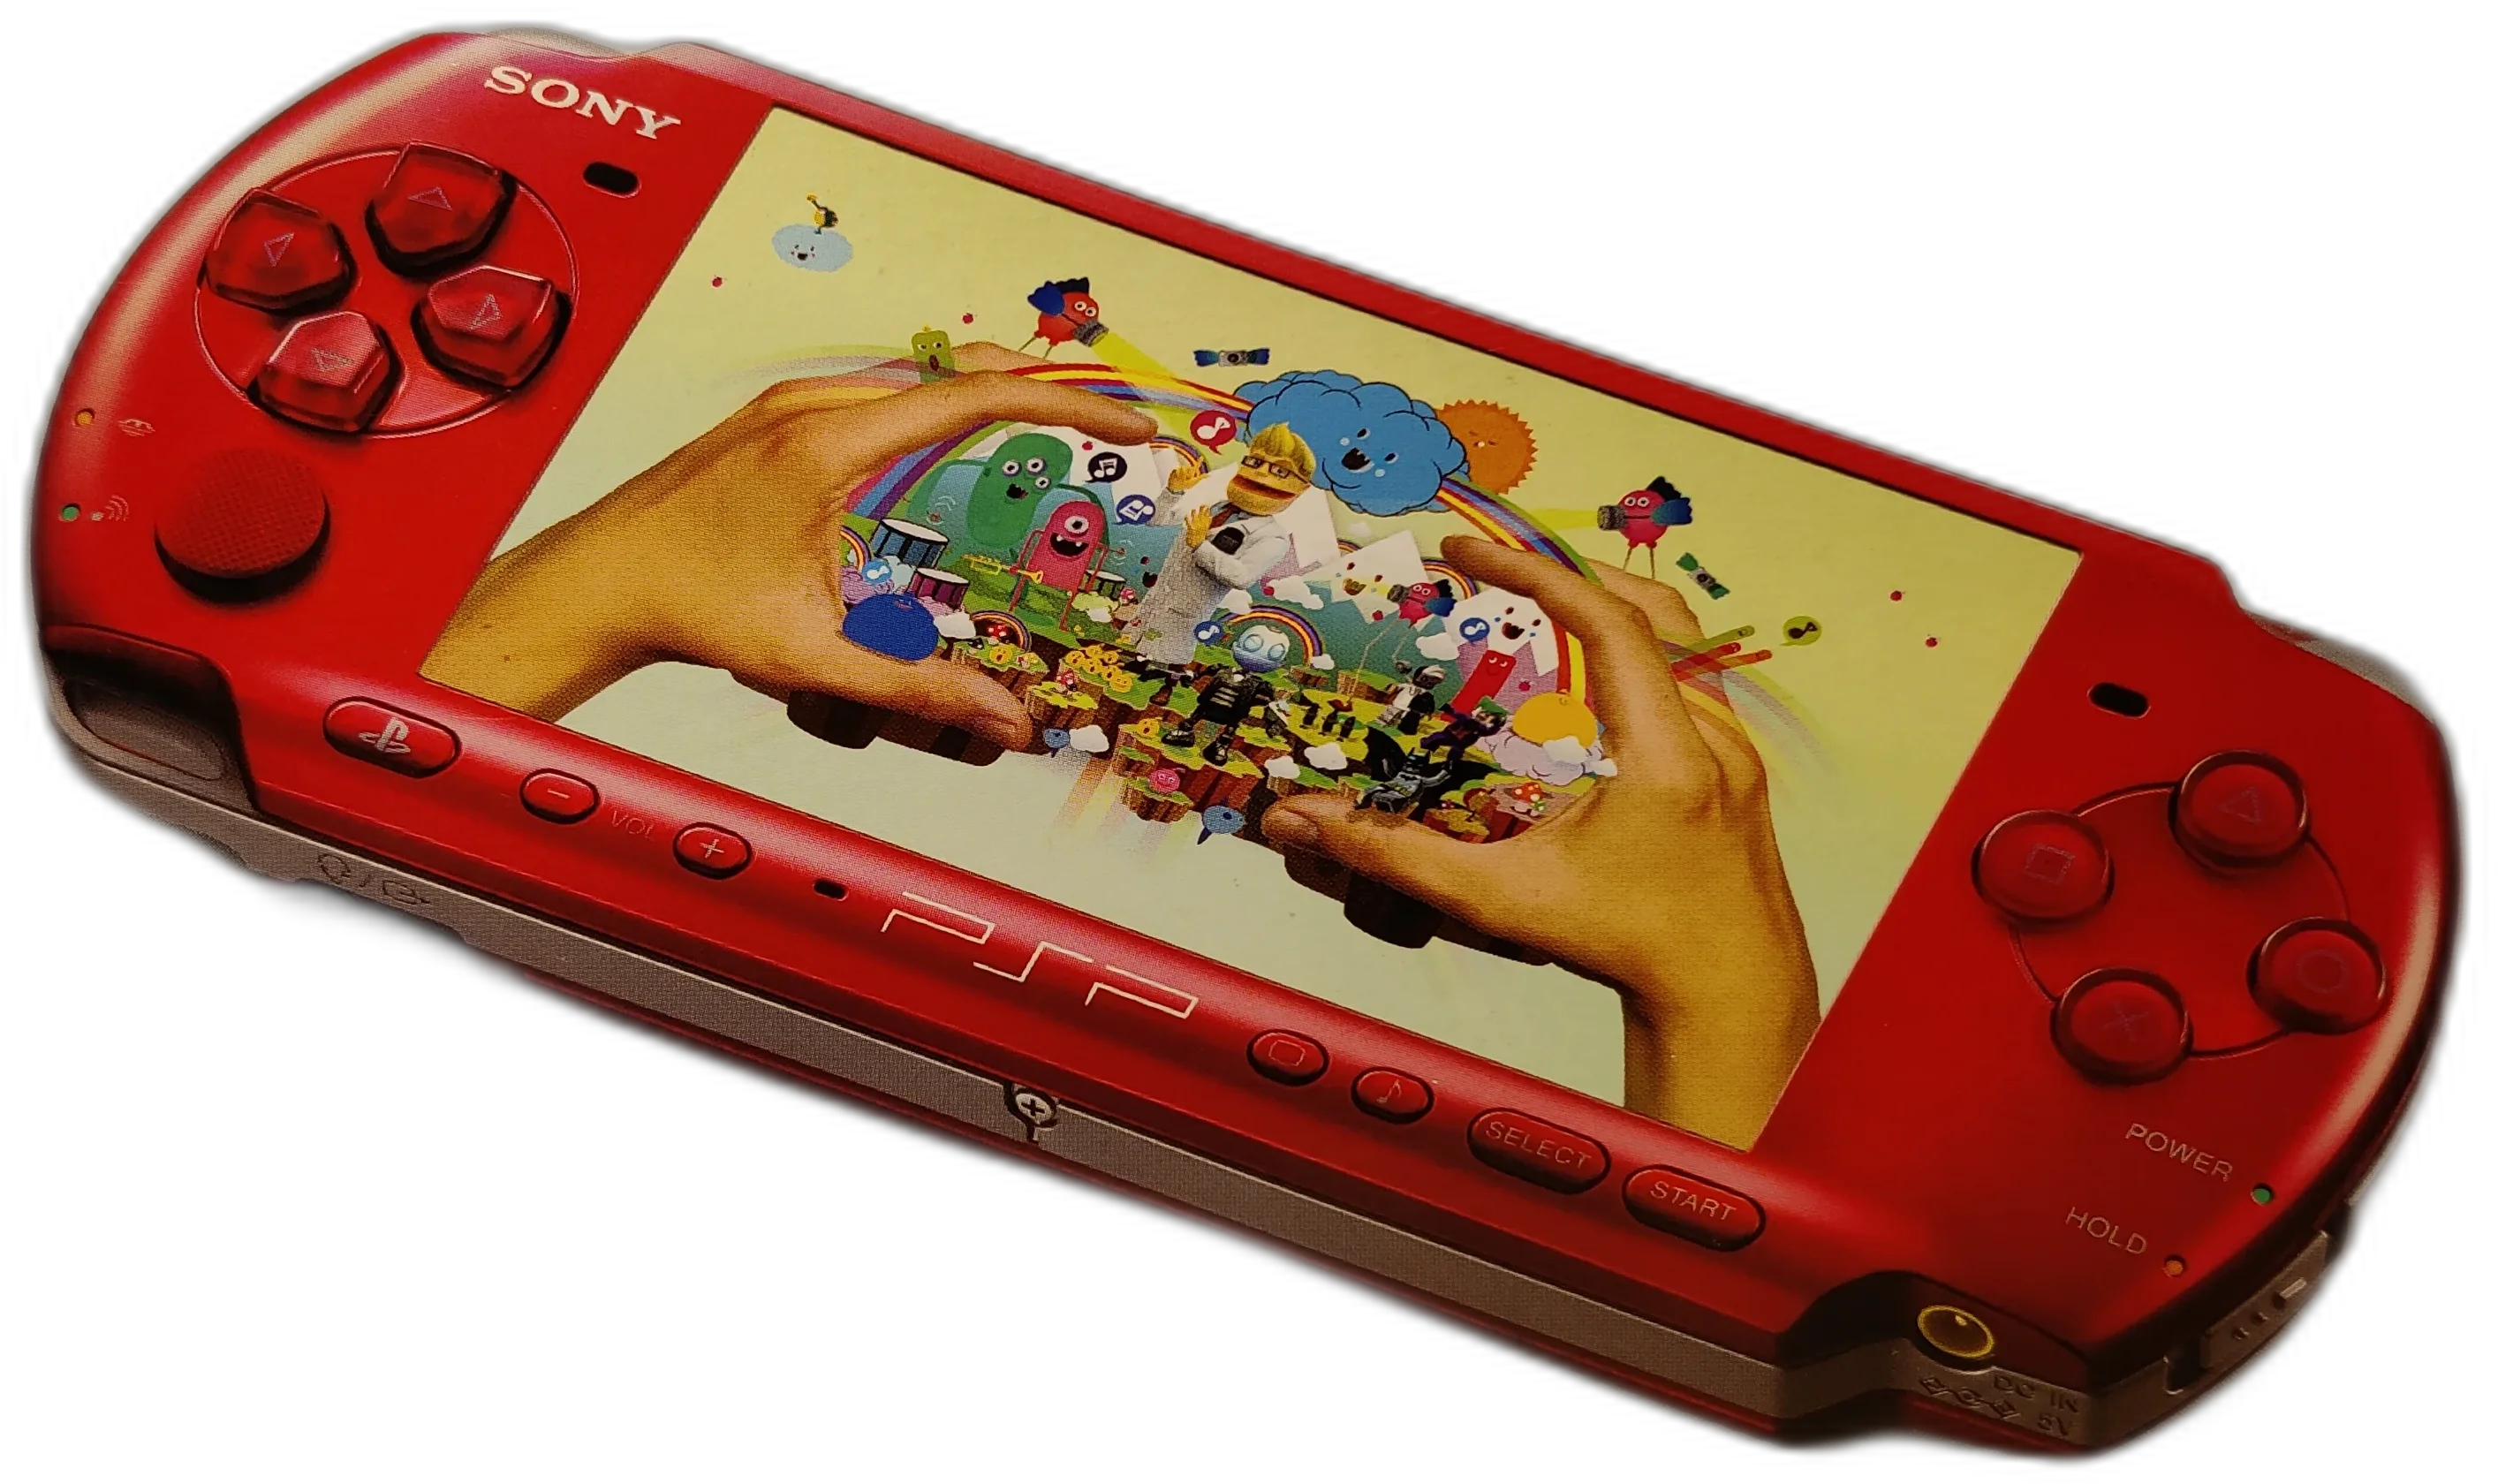 PSP 3004 Radiant Red Console [EU] - Consolevariations